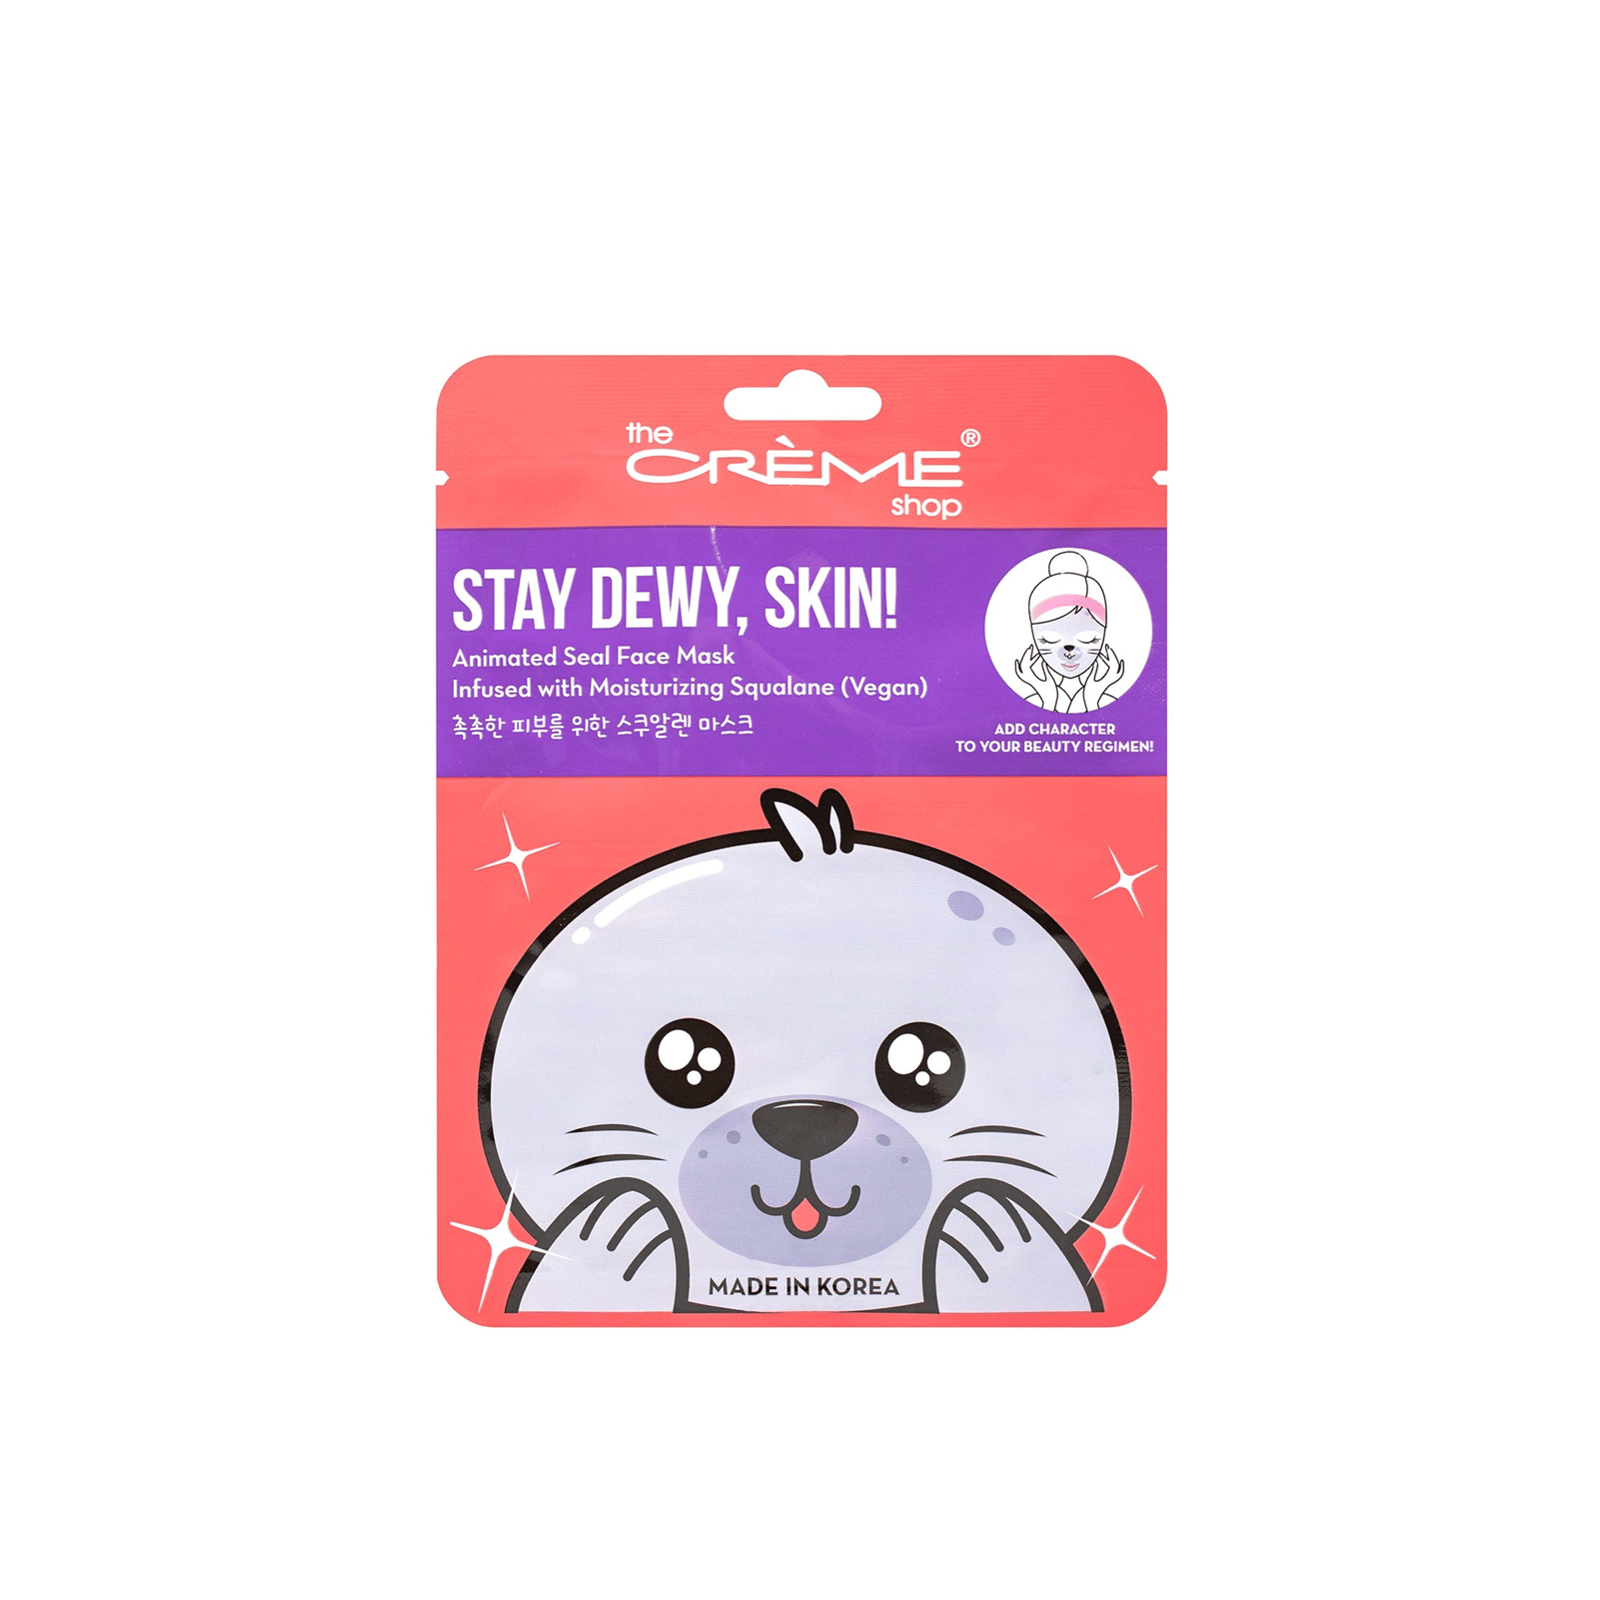 The Crème Shop Stay Dewy, Skin! Animated Seal Face Mask 25g